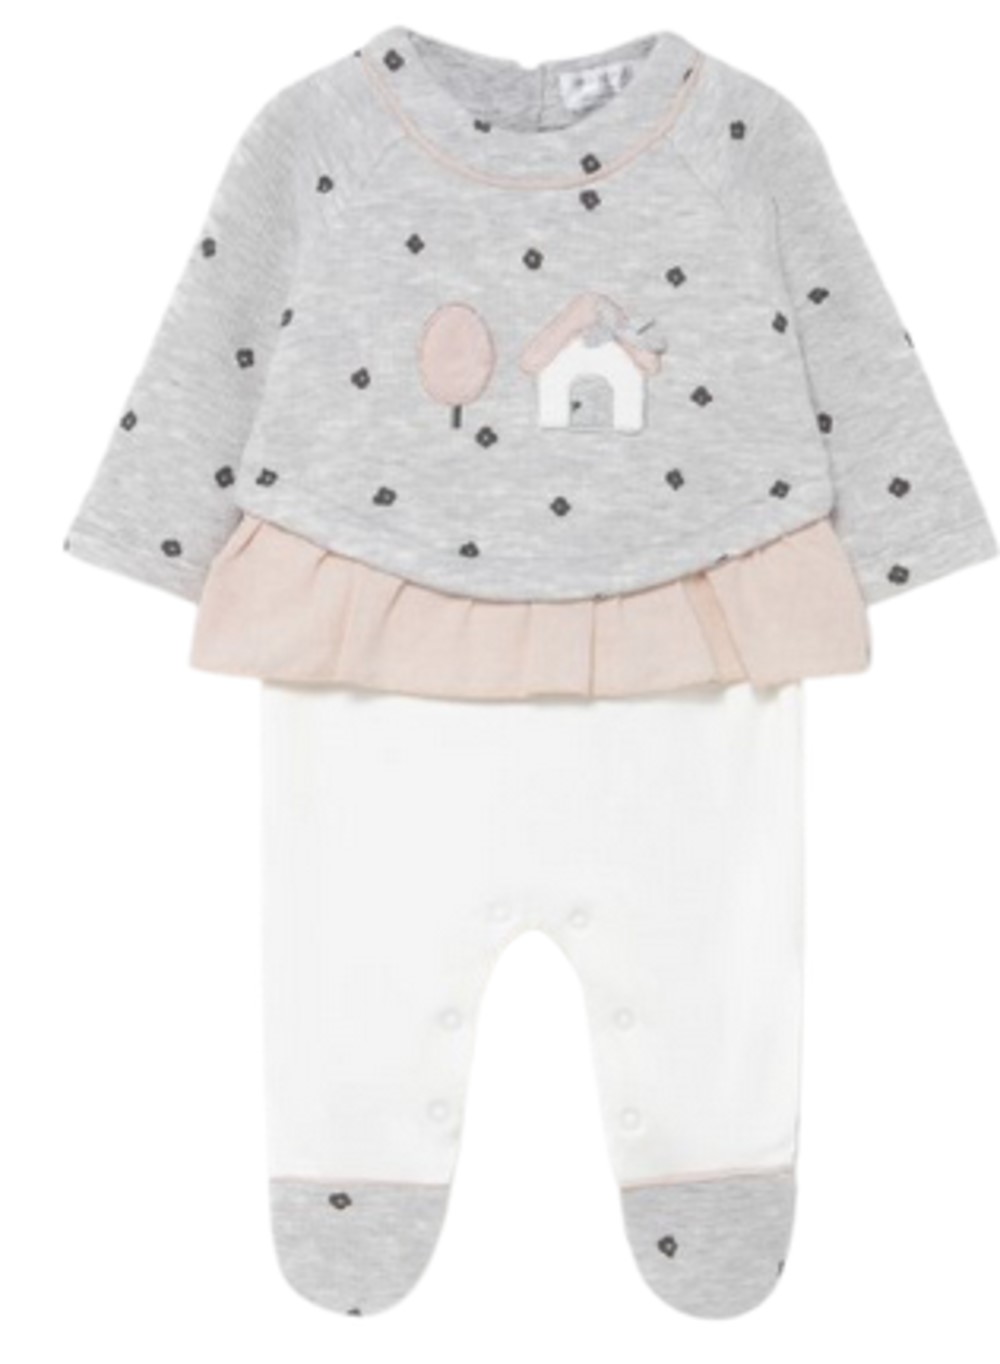 MAYORAL 2658 BABY GIRLS PEACH, IVORY AND GRAY FASHION ONE PIECE LONG SLEEVE FOOTIE